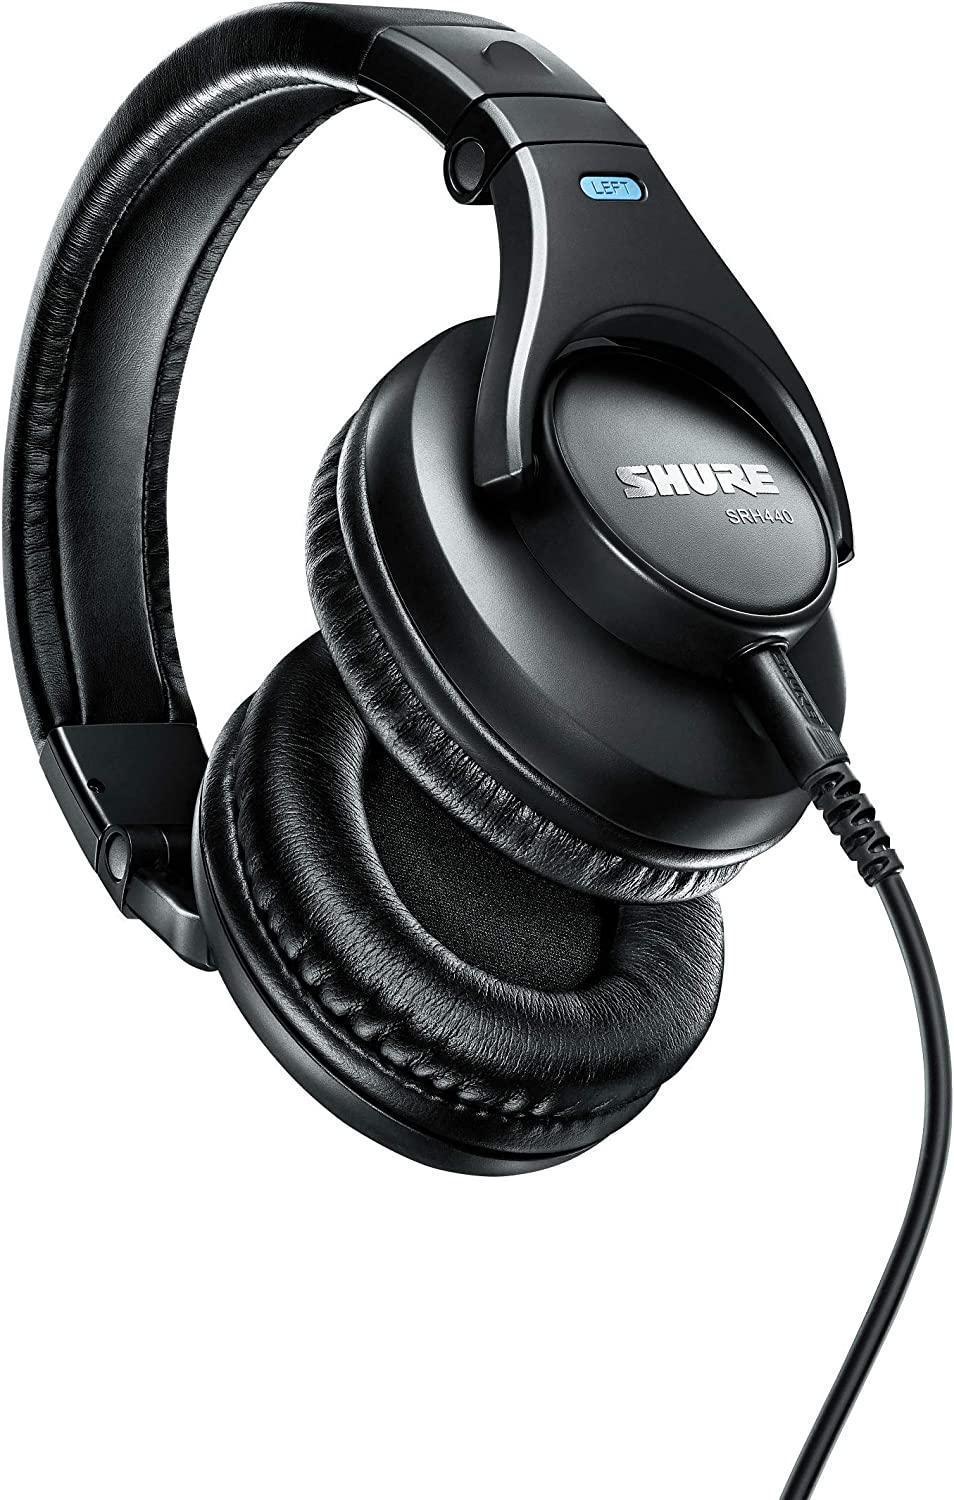 Shure SRH440 Professional Studio Headphones, Enhanced Frequency Response and Extended Range for Home and Studio Recording, with Detachable Coiled Cable, Carrying Bag and 1/4" Adapter (SRH440-BK)